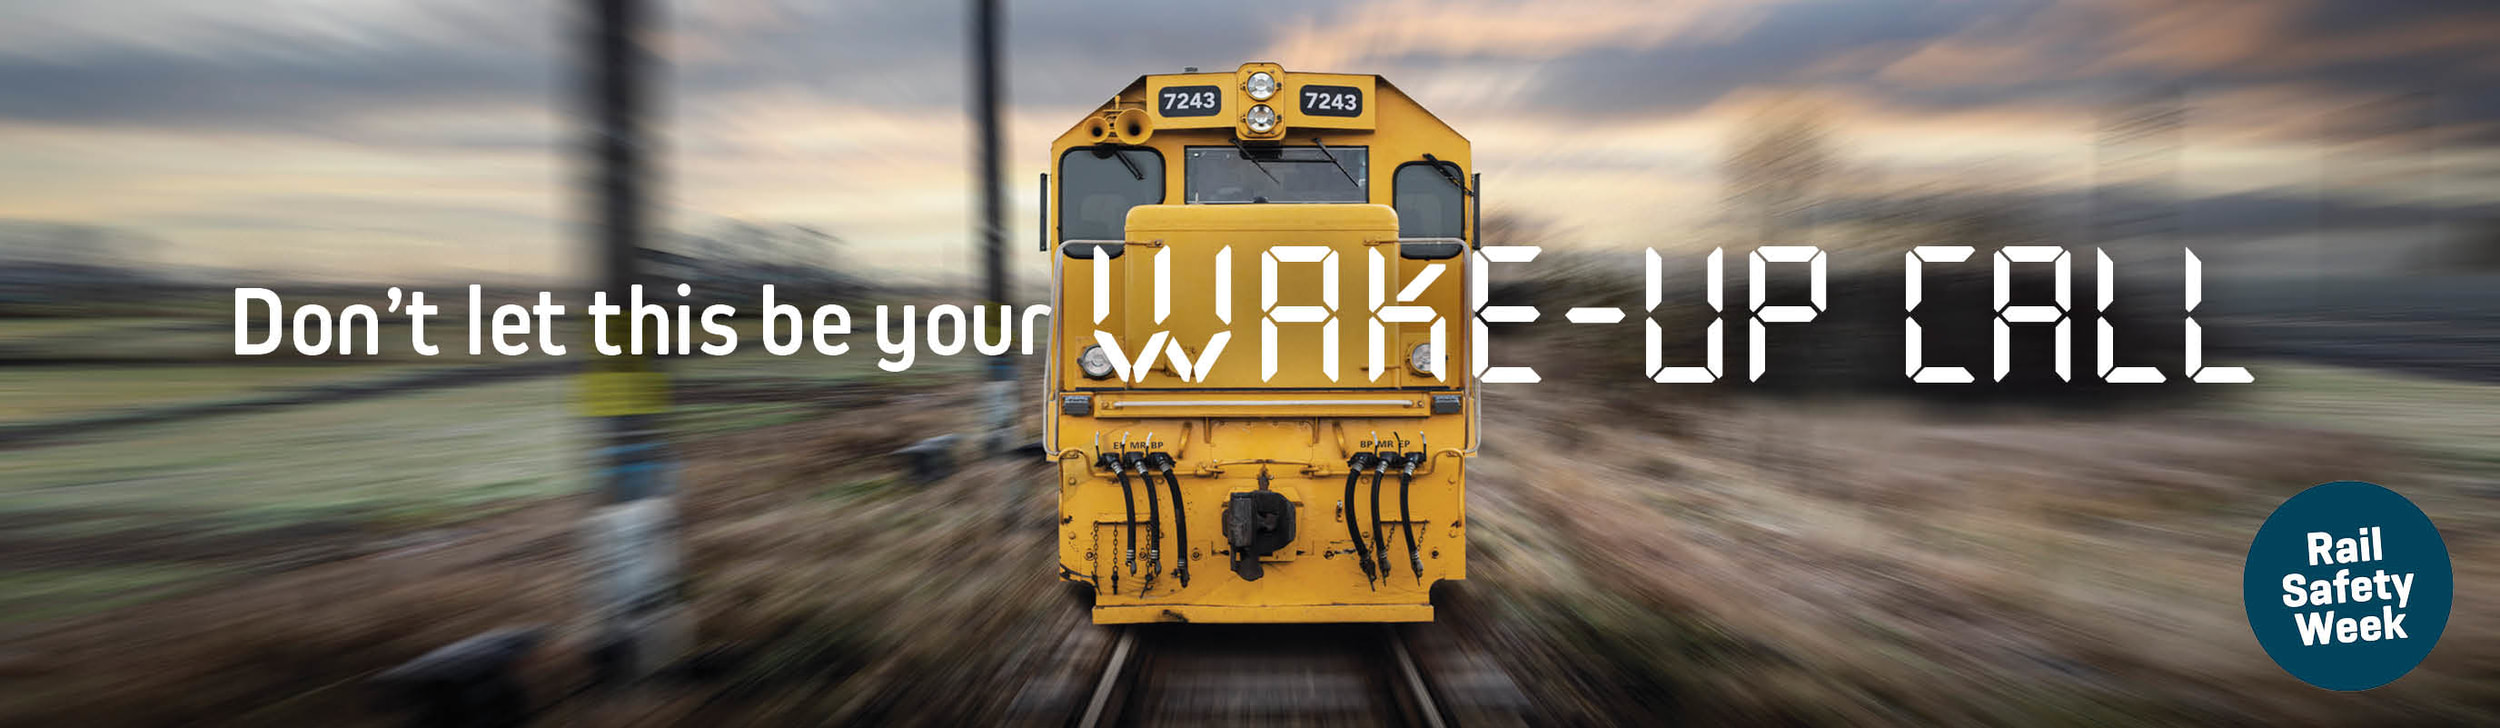 Rail Safety Week - Don't let this be your WAKE UP CALL